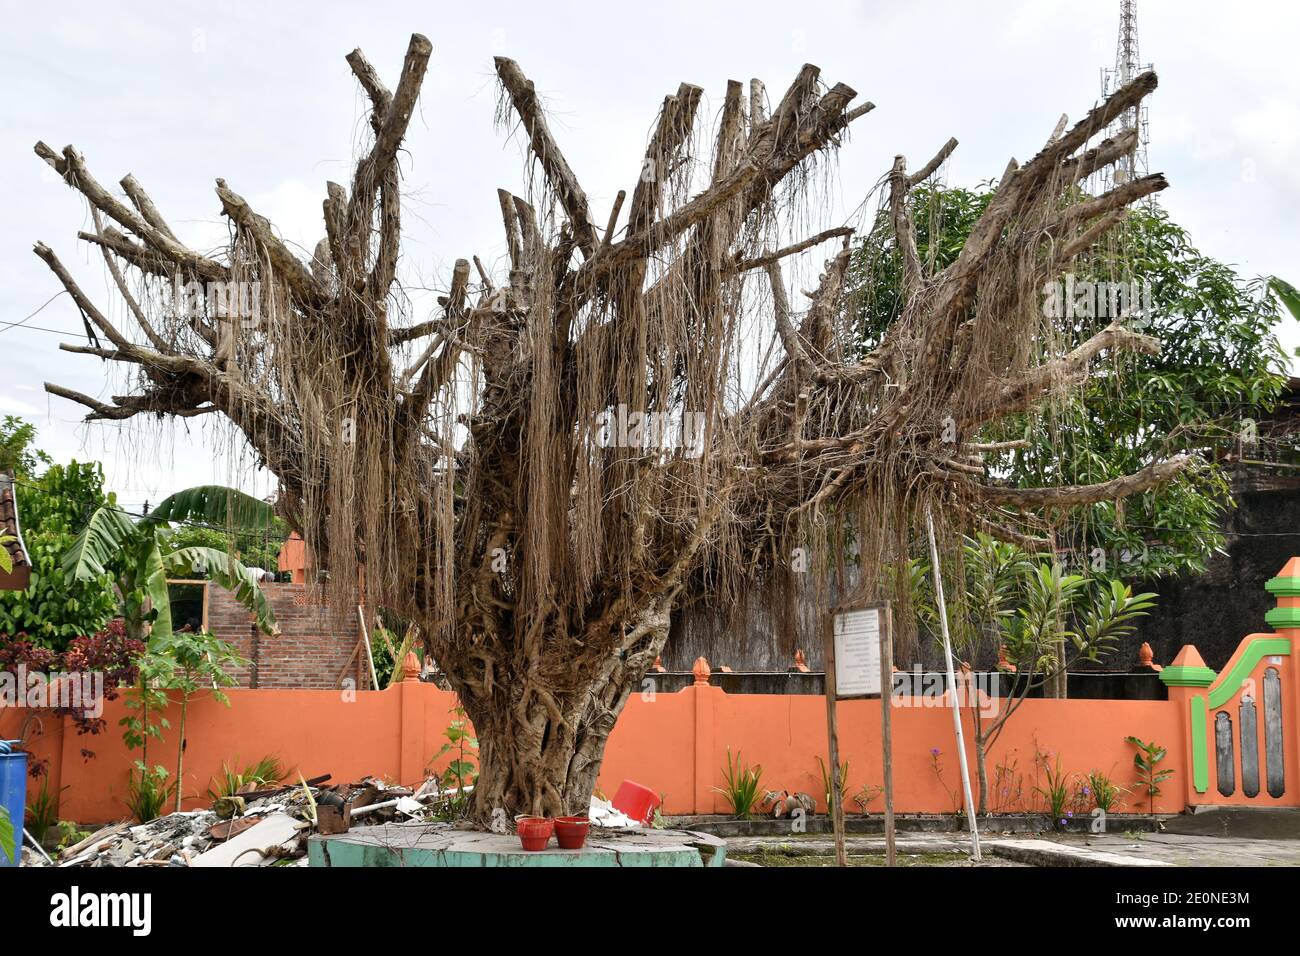 an old and drying banyan tree Stock Photo